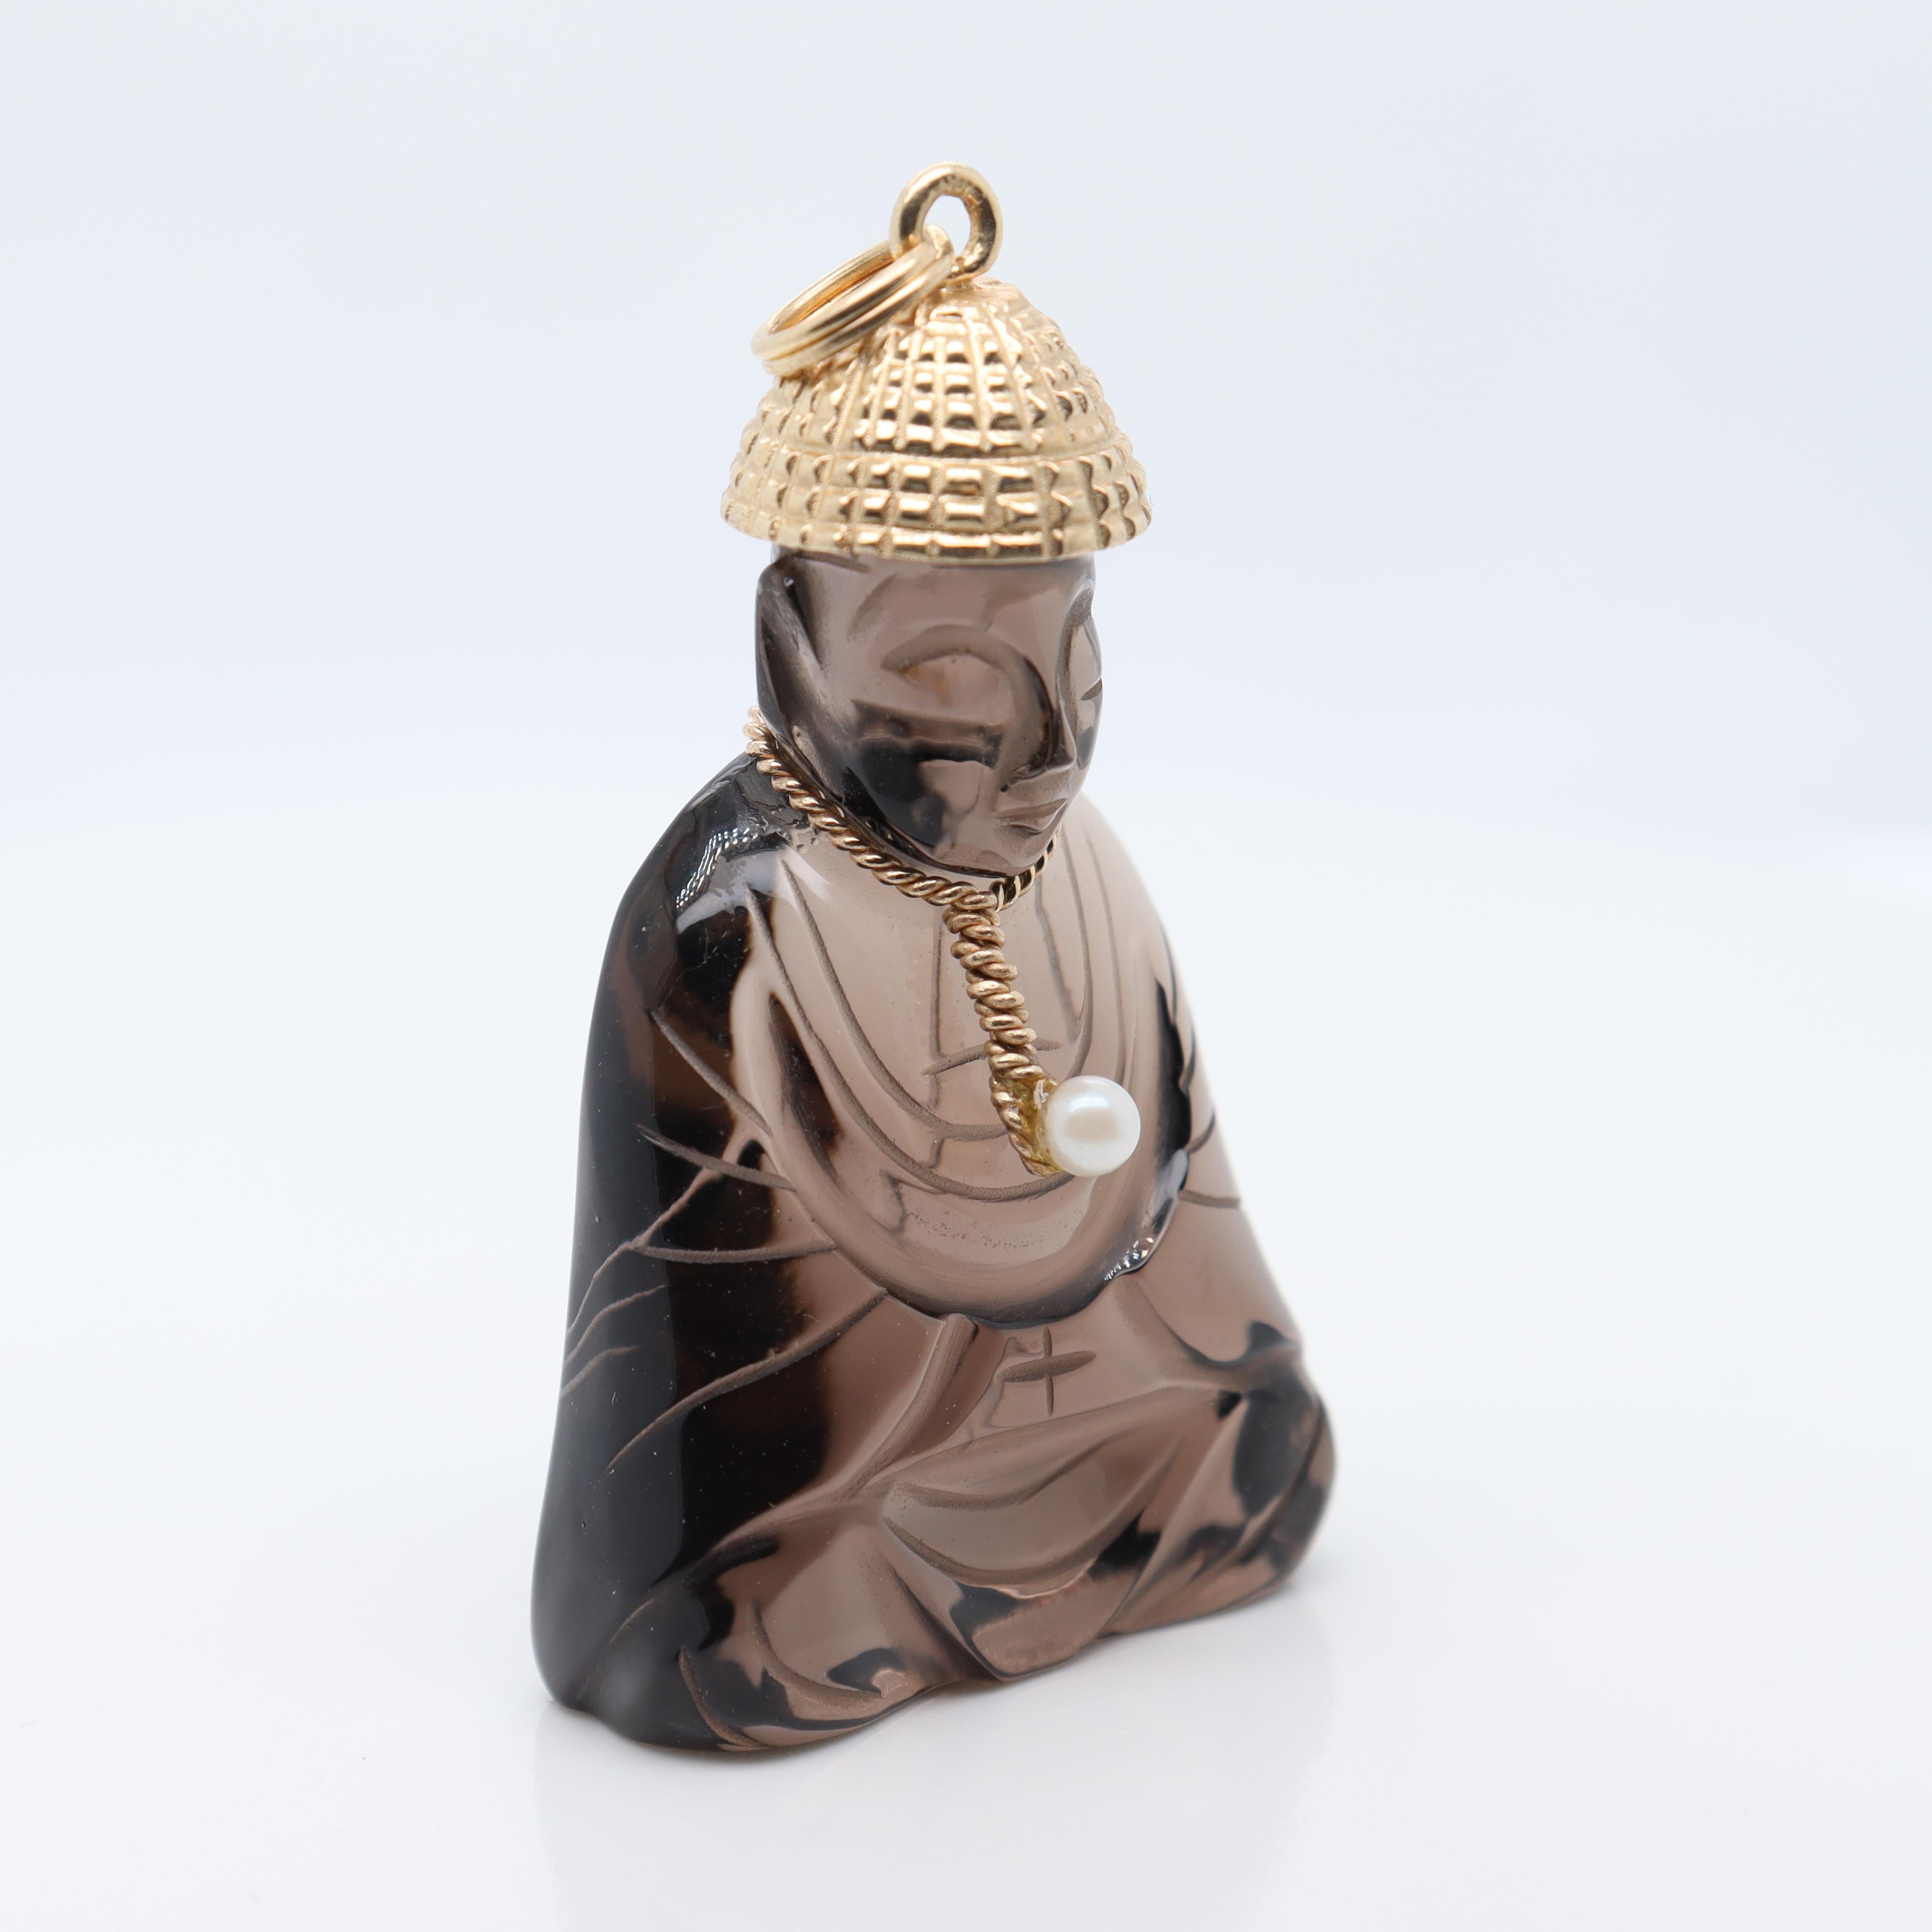 Retro Signed 14k Gold, Smoky Quartz, & Seed Pearl Carved Buddha Charm or Pendant In Good Condition For Sale In Philadelphia, PA